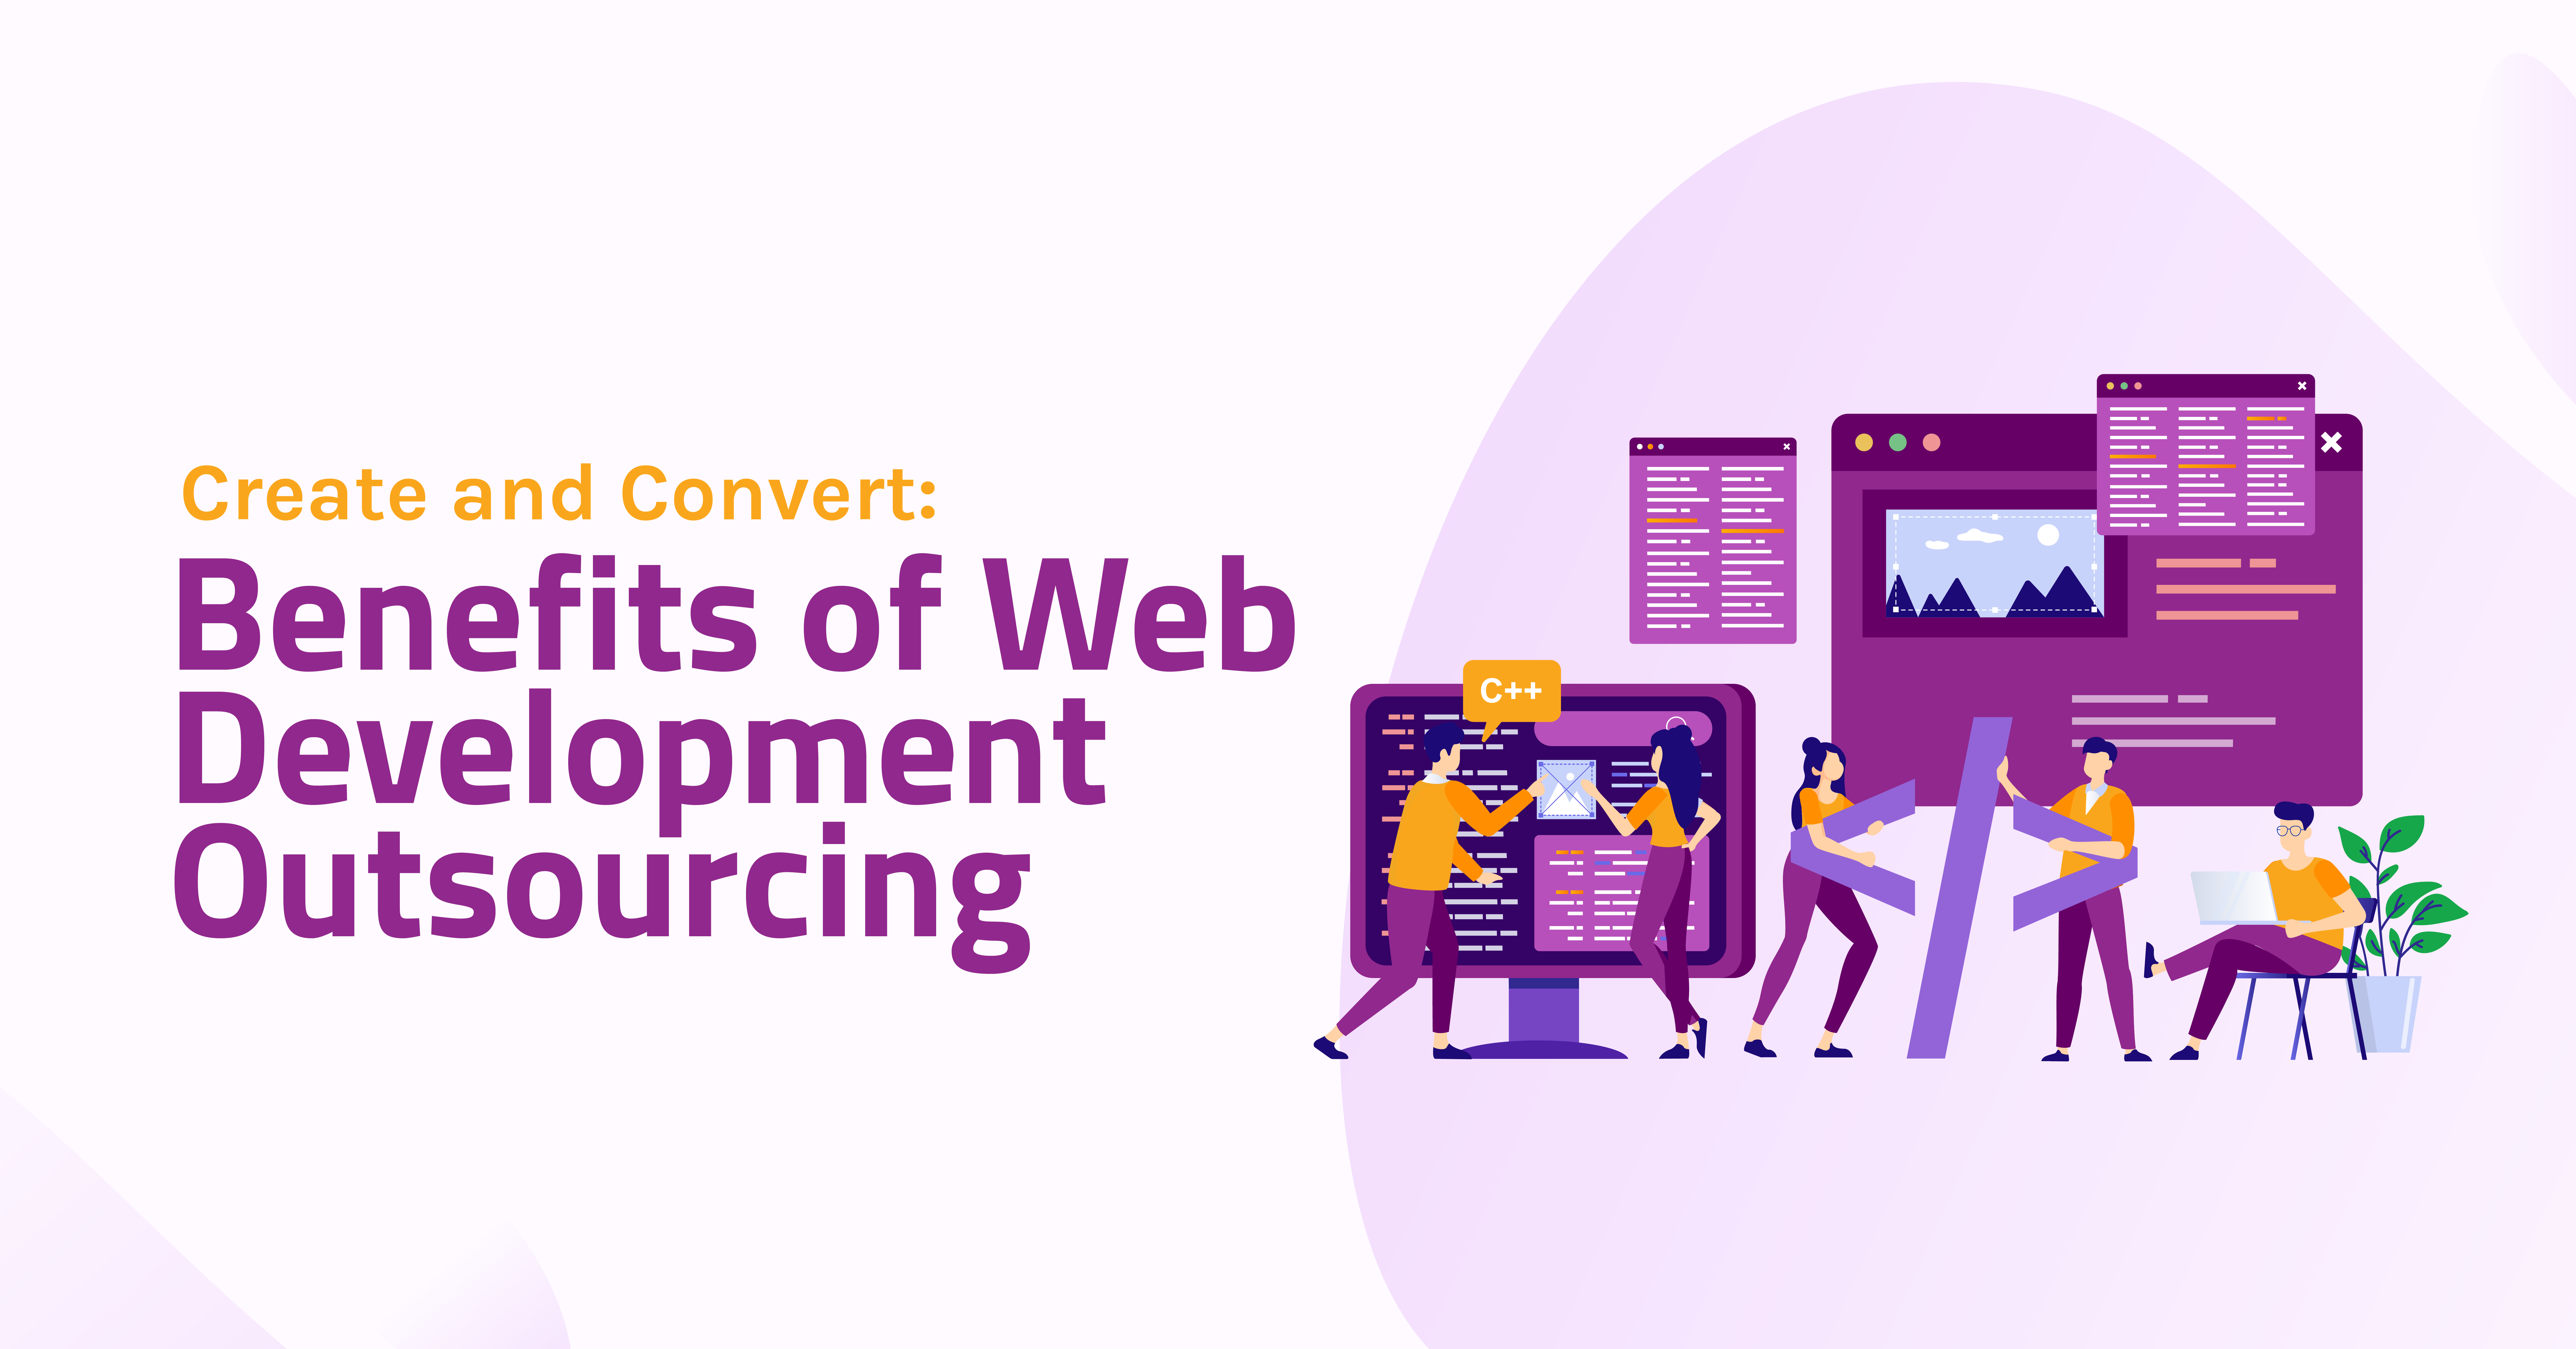 Benefits of Web Development Outsourcing